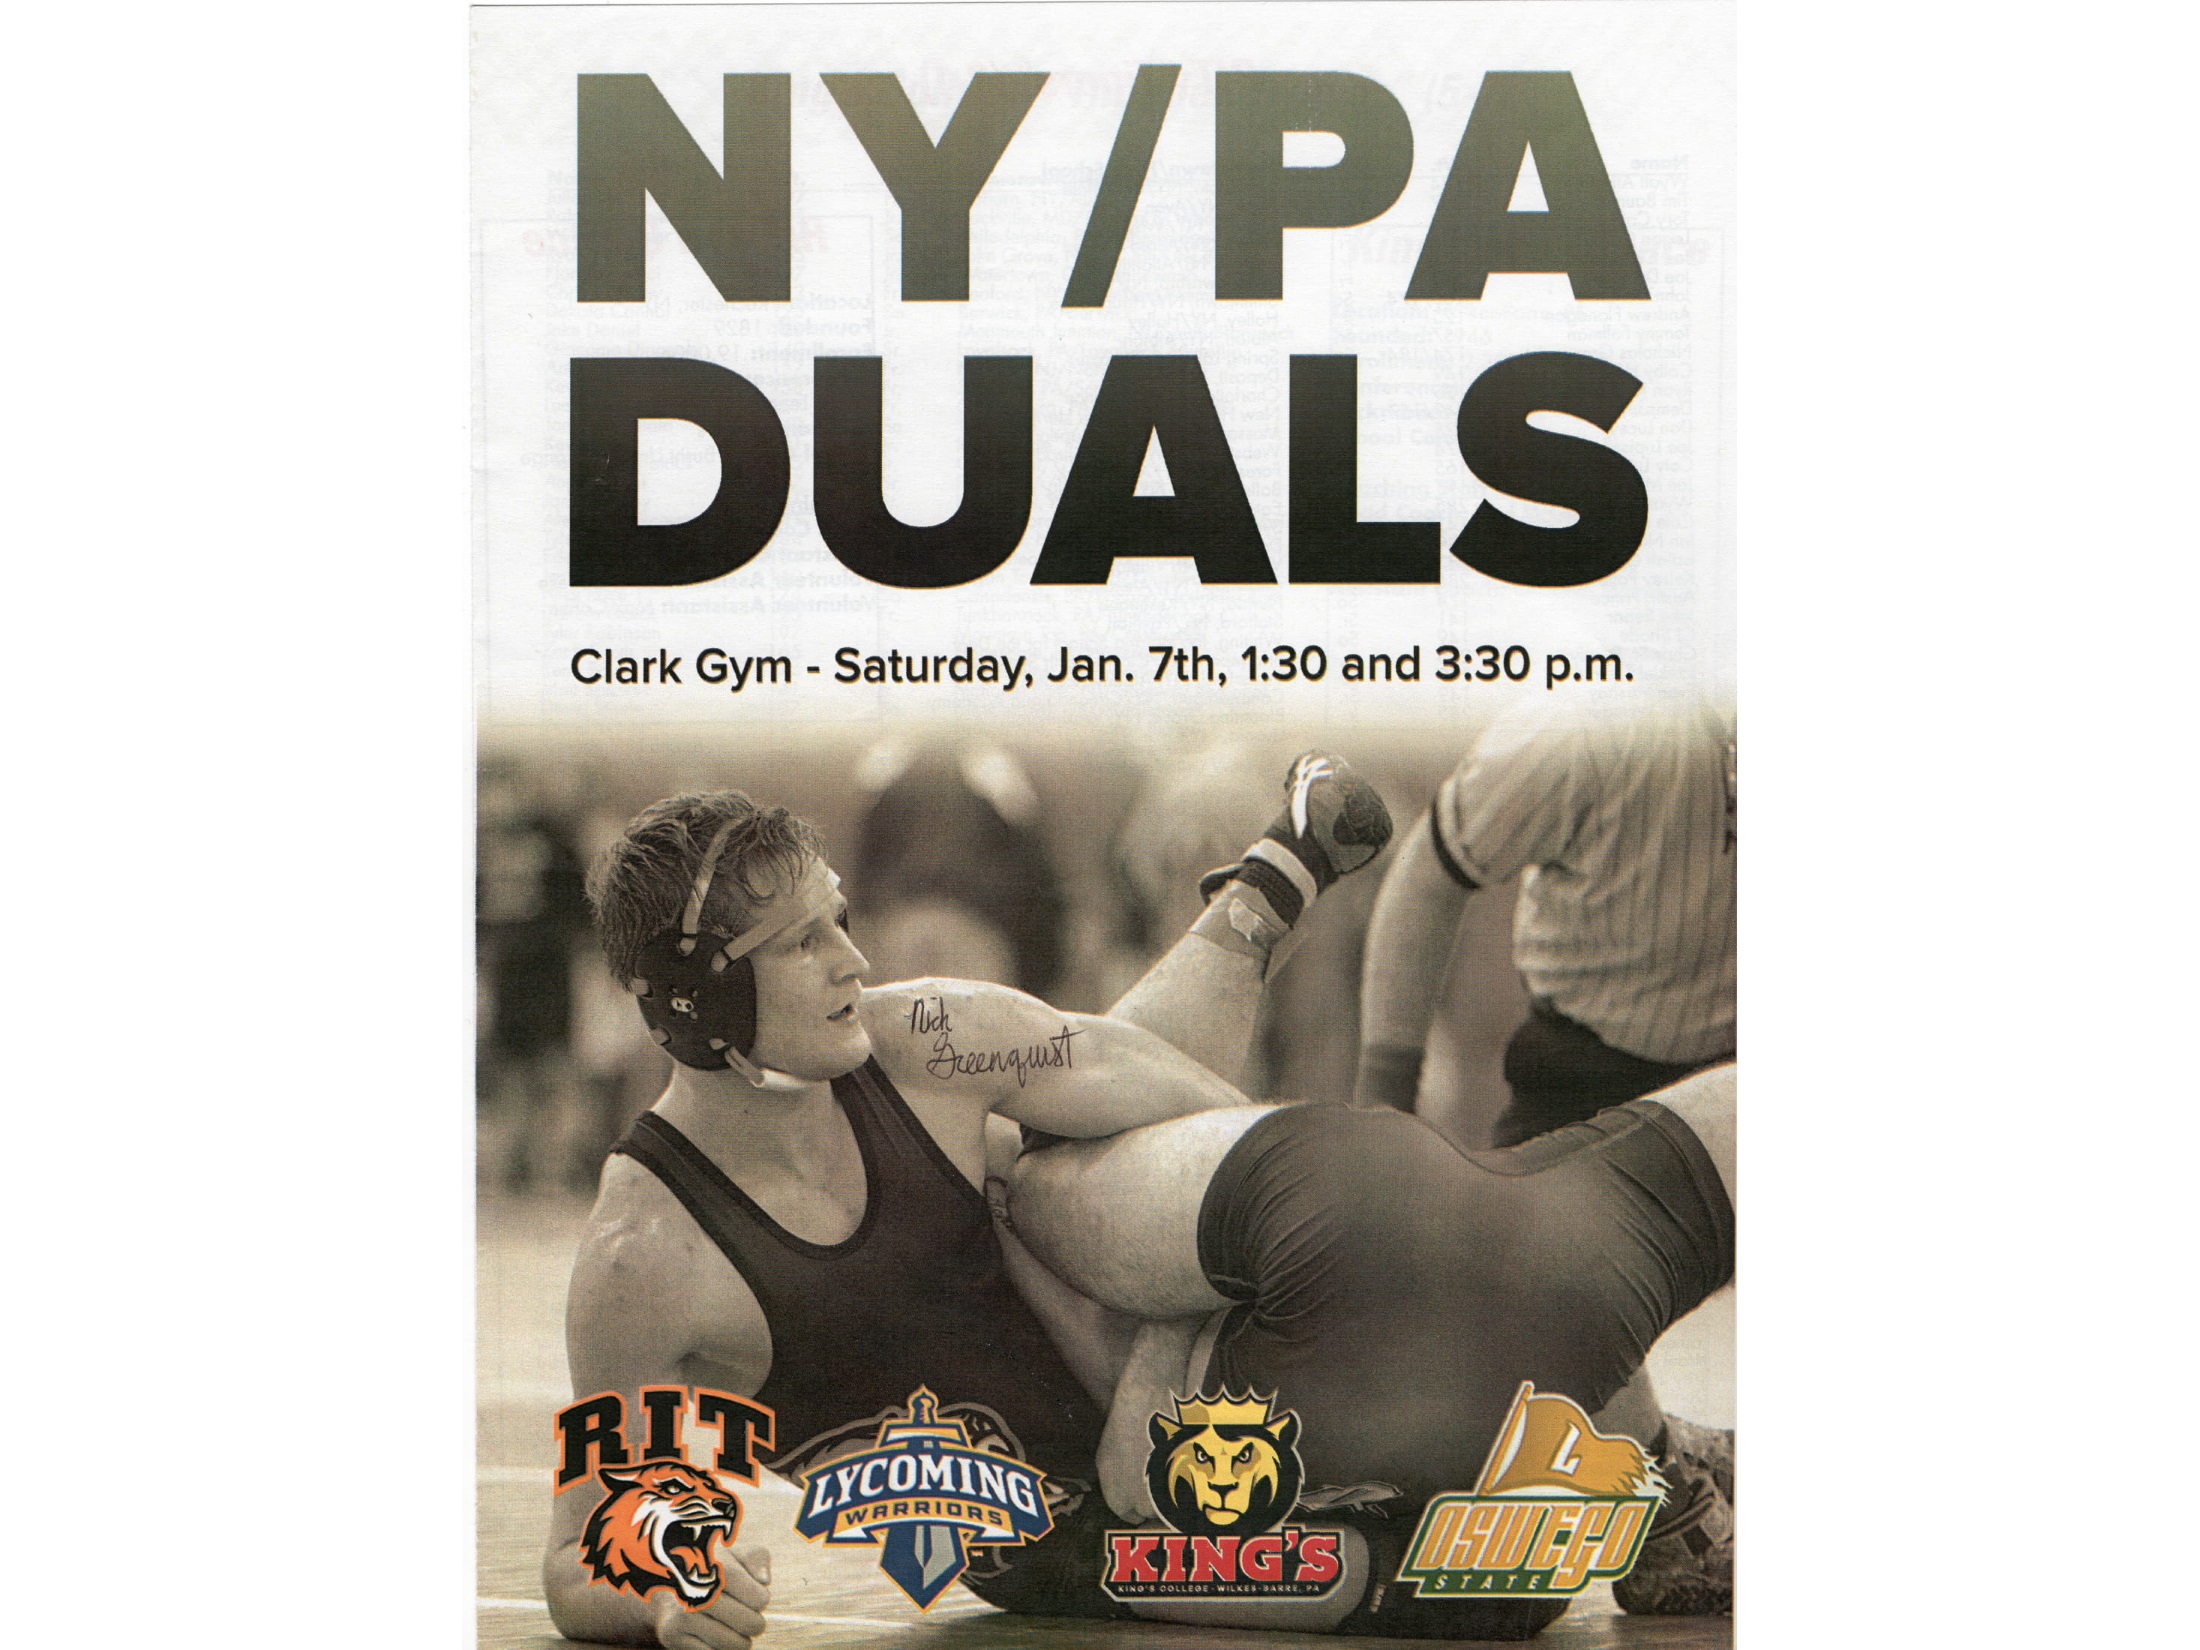 Signature Spladle claims another victim. I guess RIT decided to use that image to market the NY vs PA Duals. And yes I signed it. Sue me.